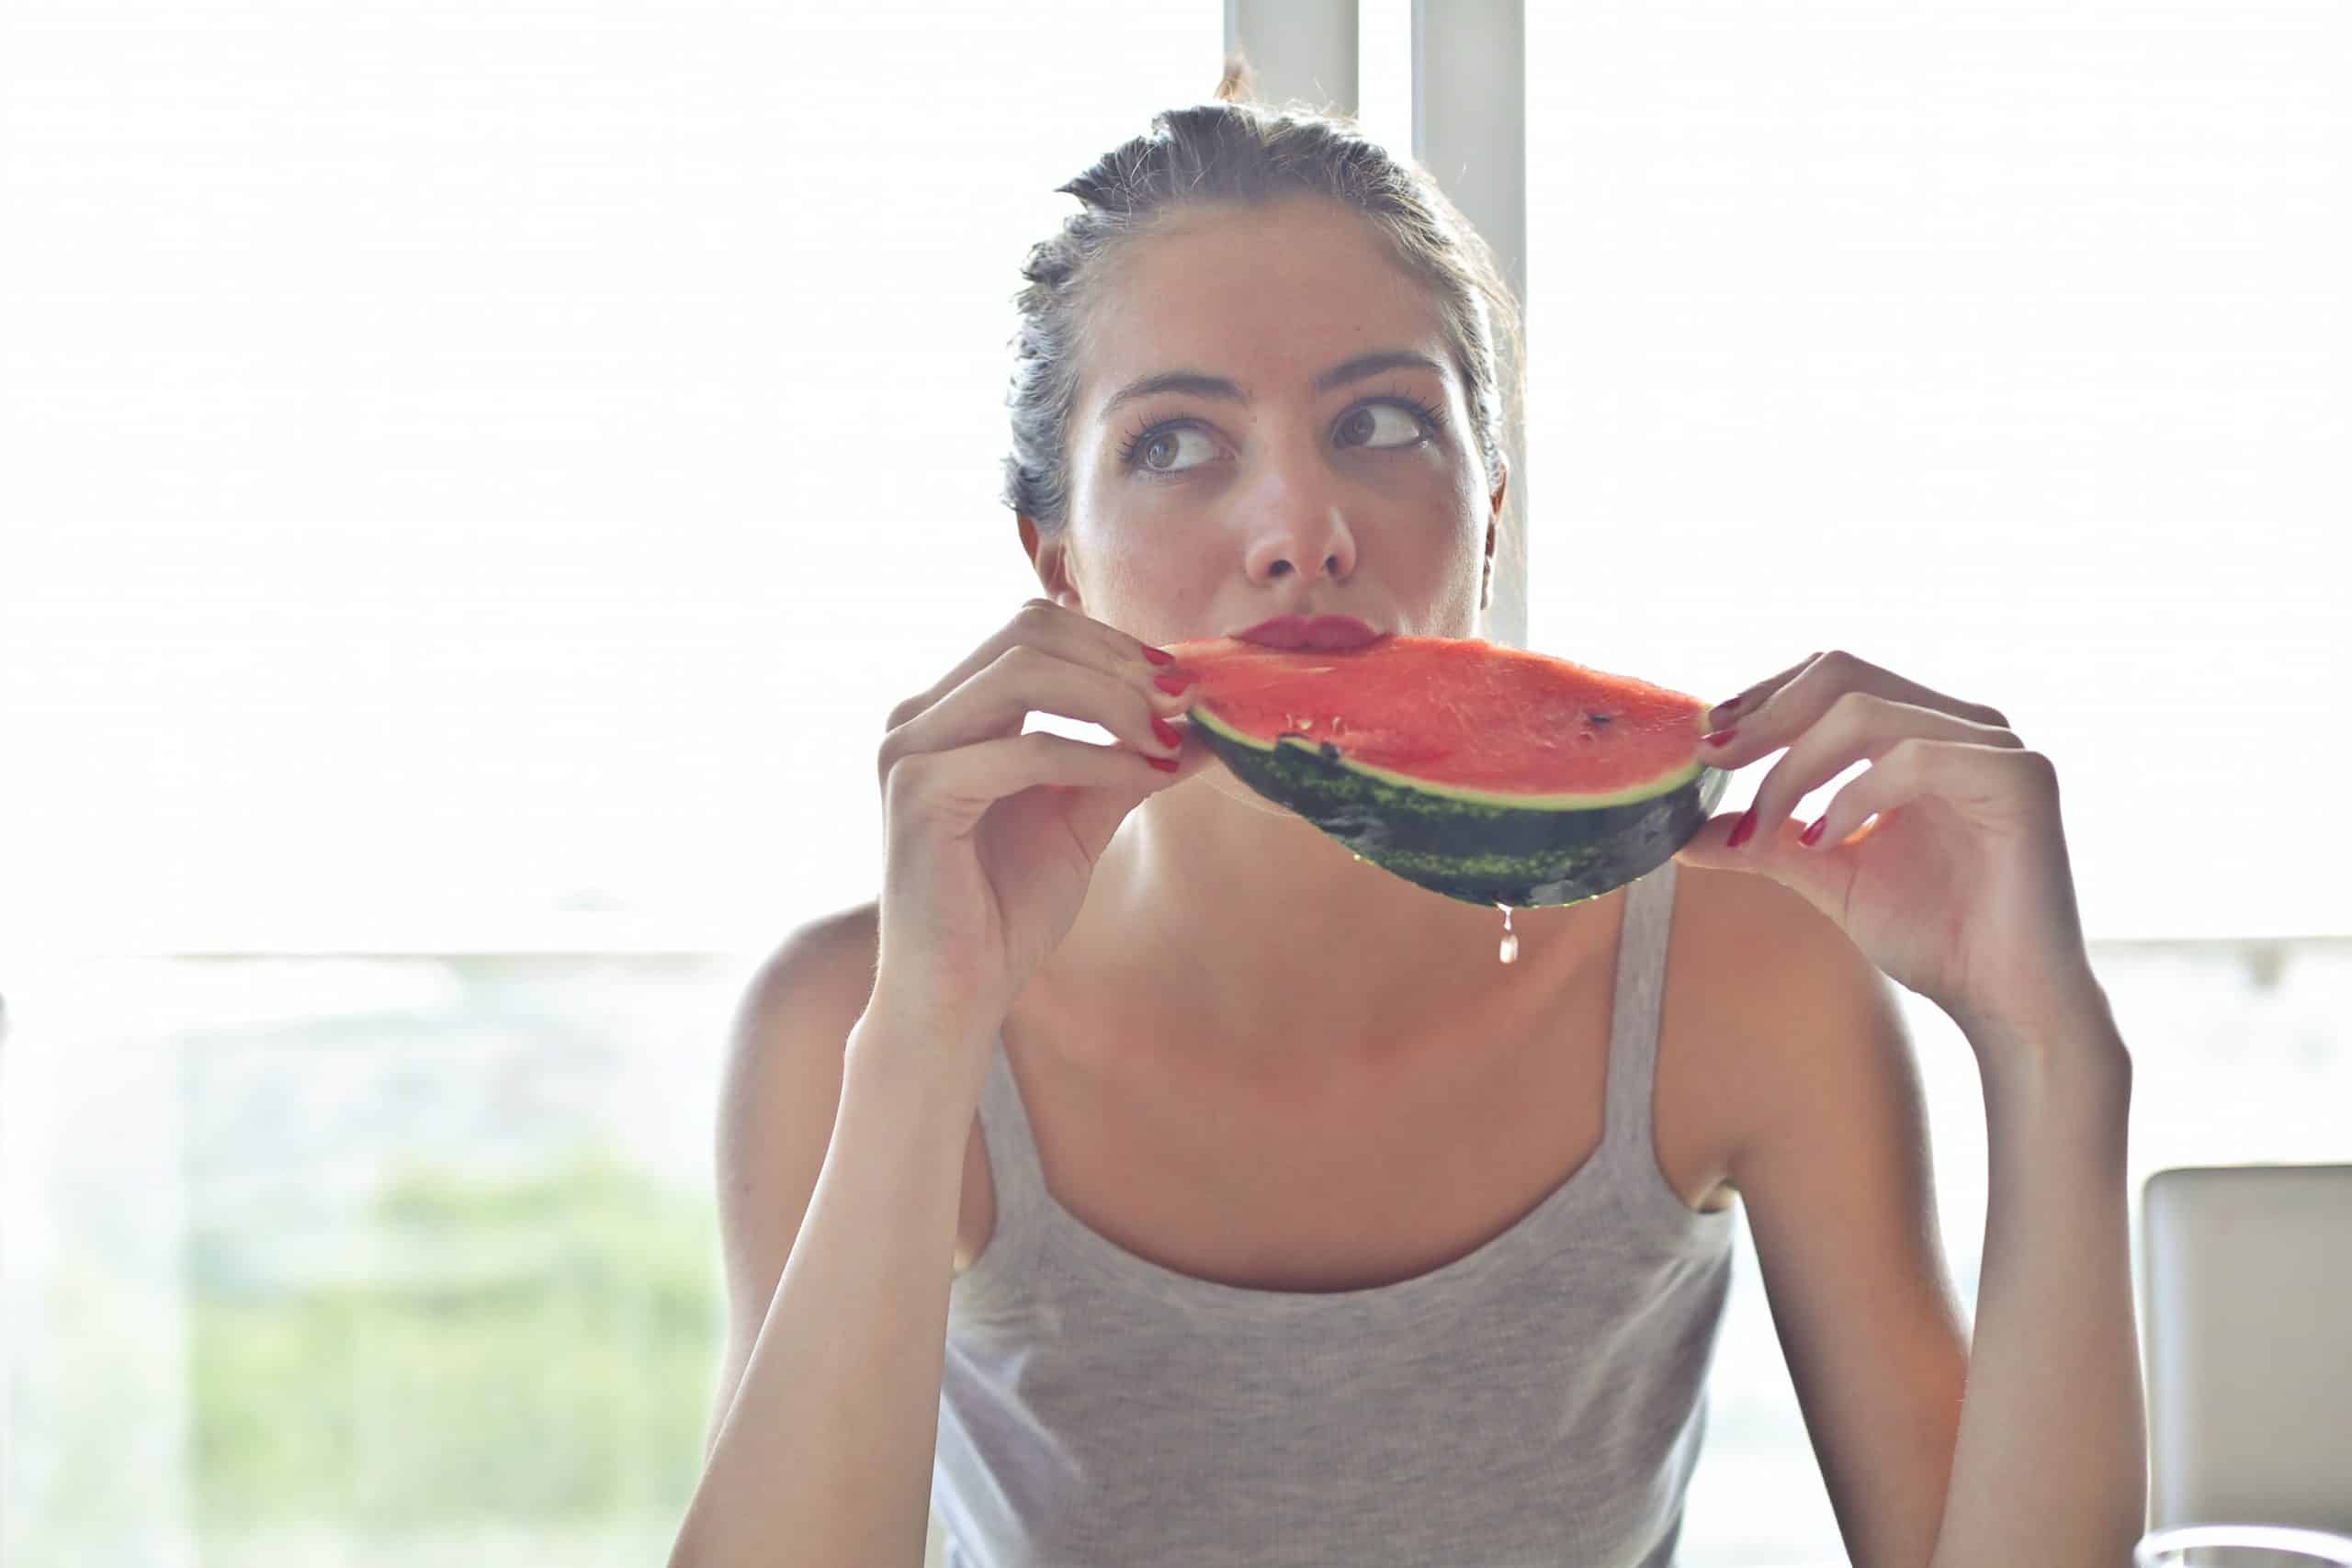 Can all fruits be eaten during a weight loss diet?